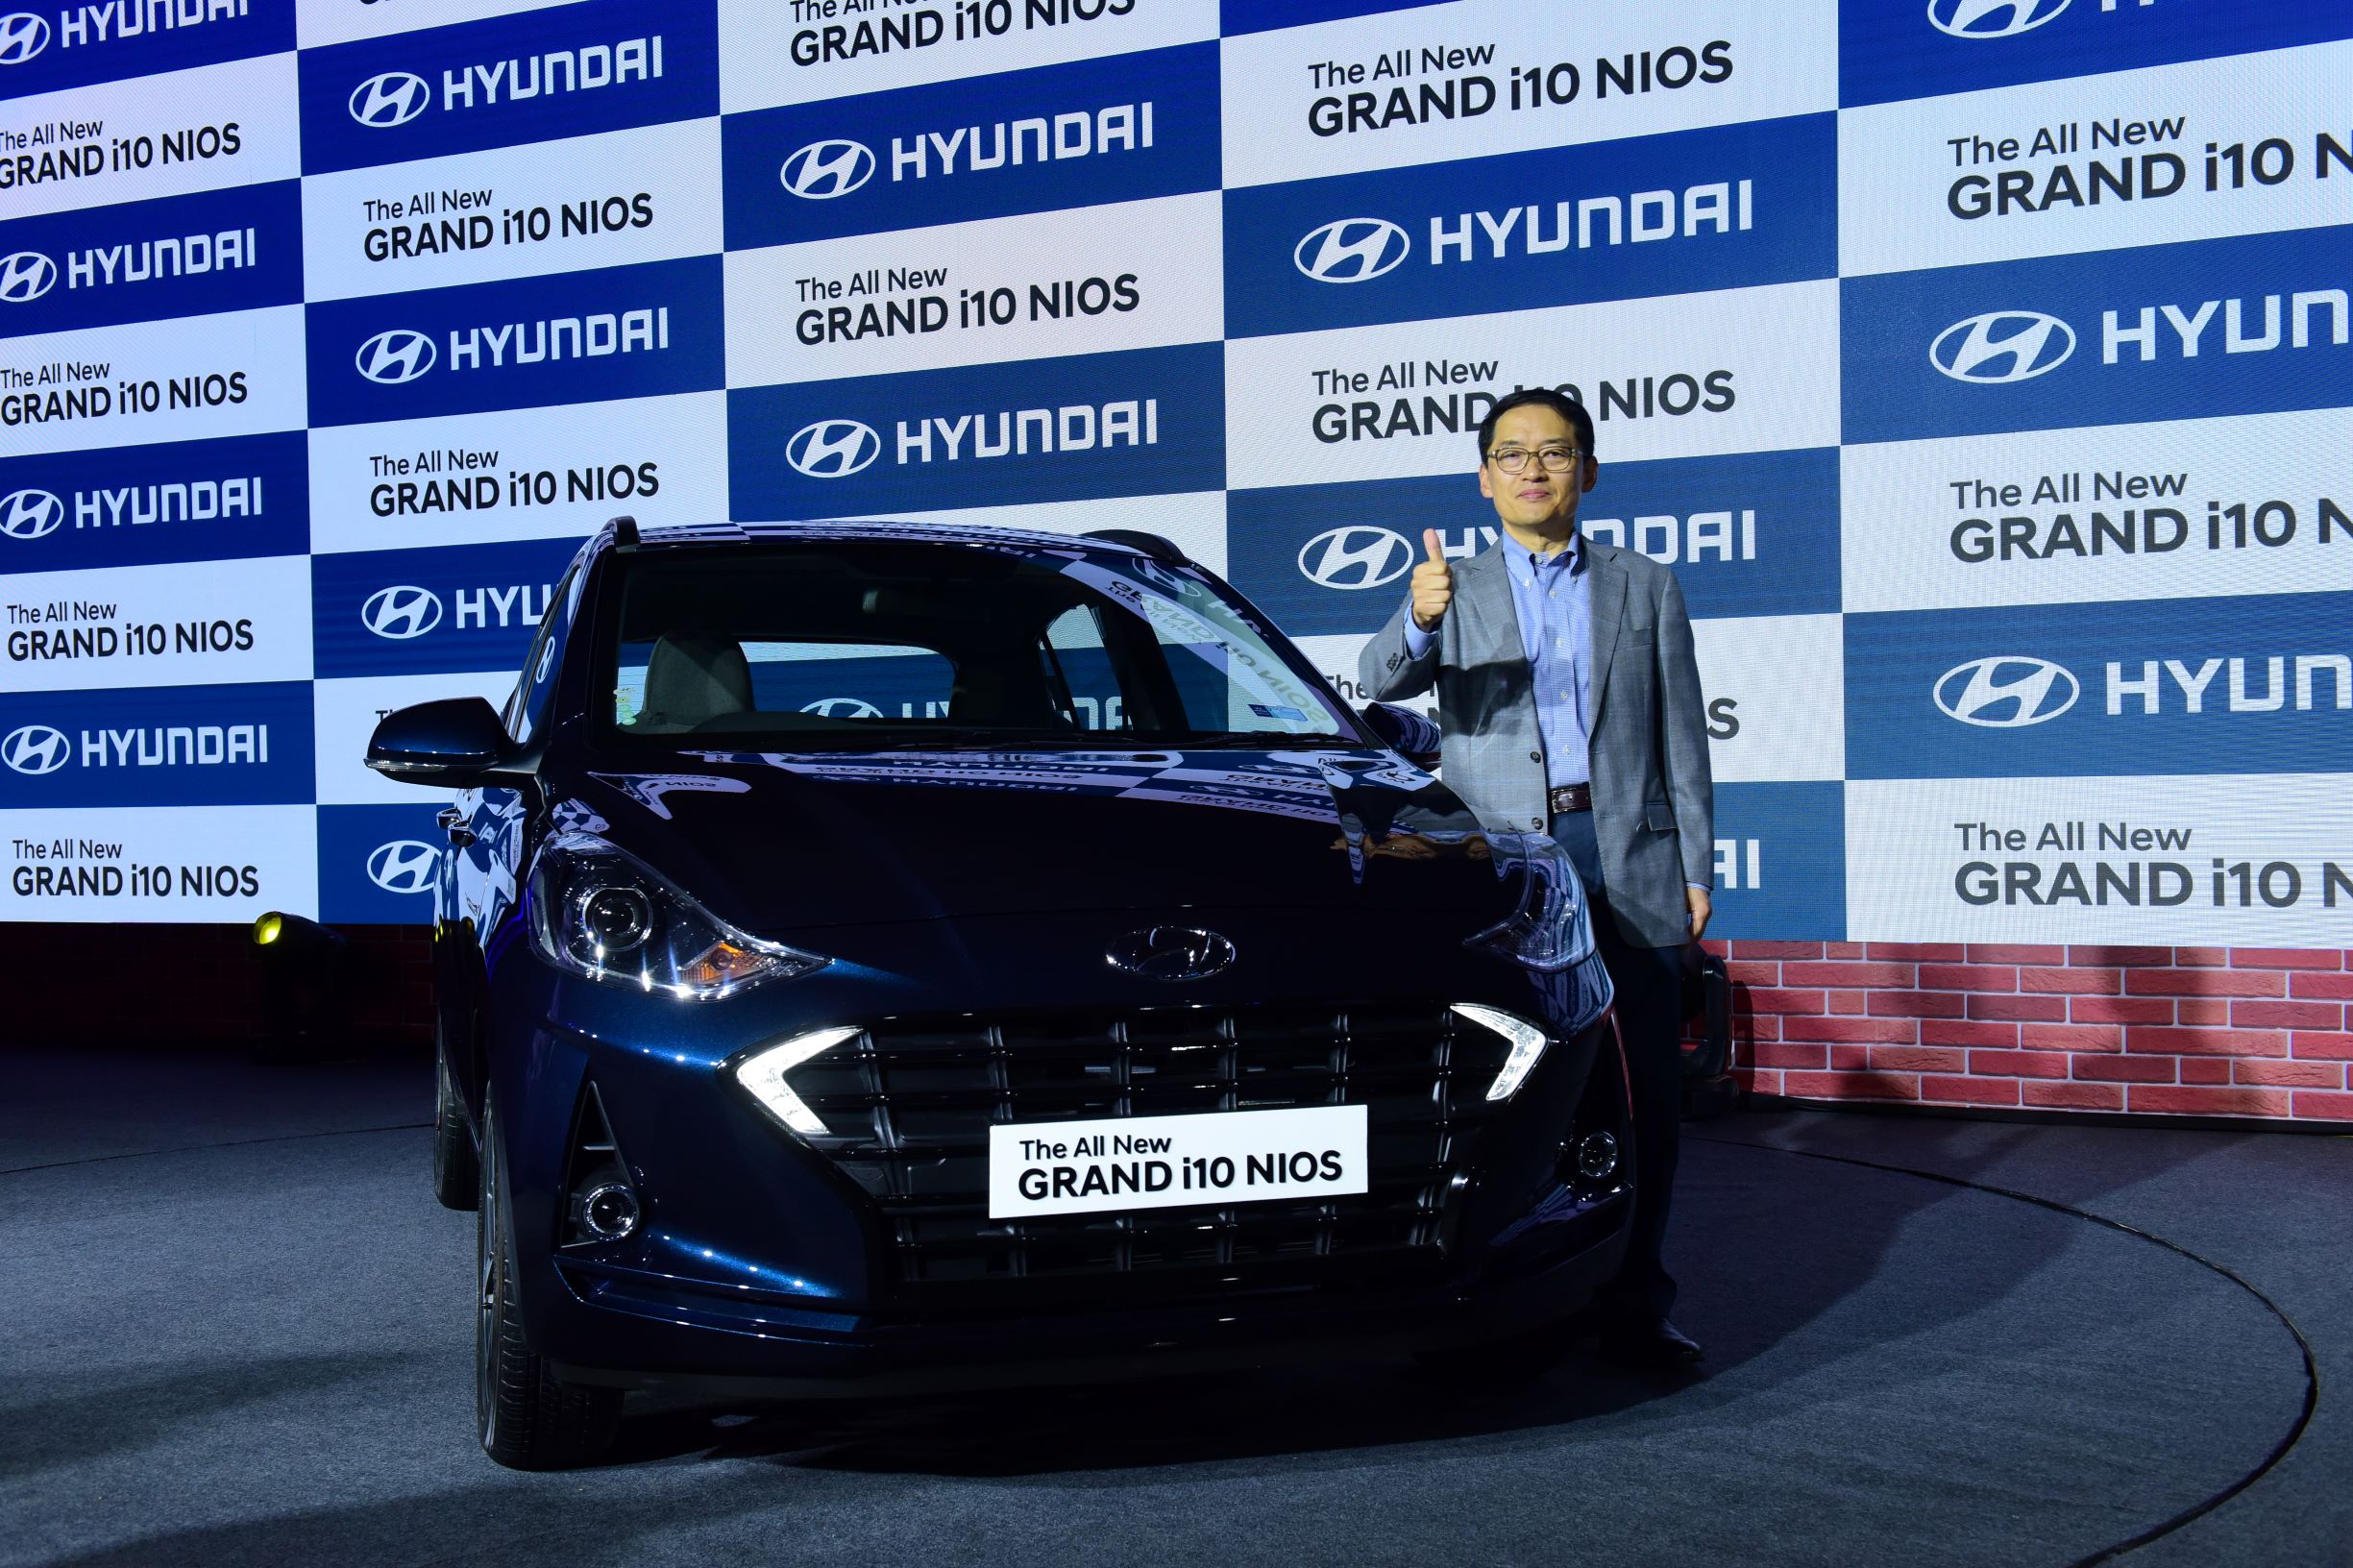 Mr. S.S. Kim, MD & CEO, Hyundai Motor India Limited at the Launch of Hyundai GRAND i10 NIOS in New Delhi -Photo By GPN